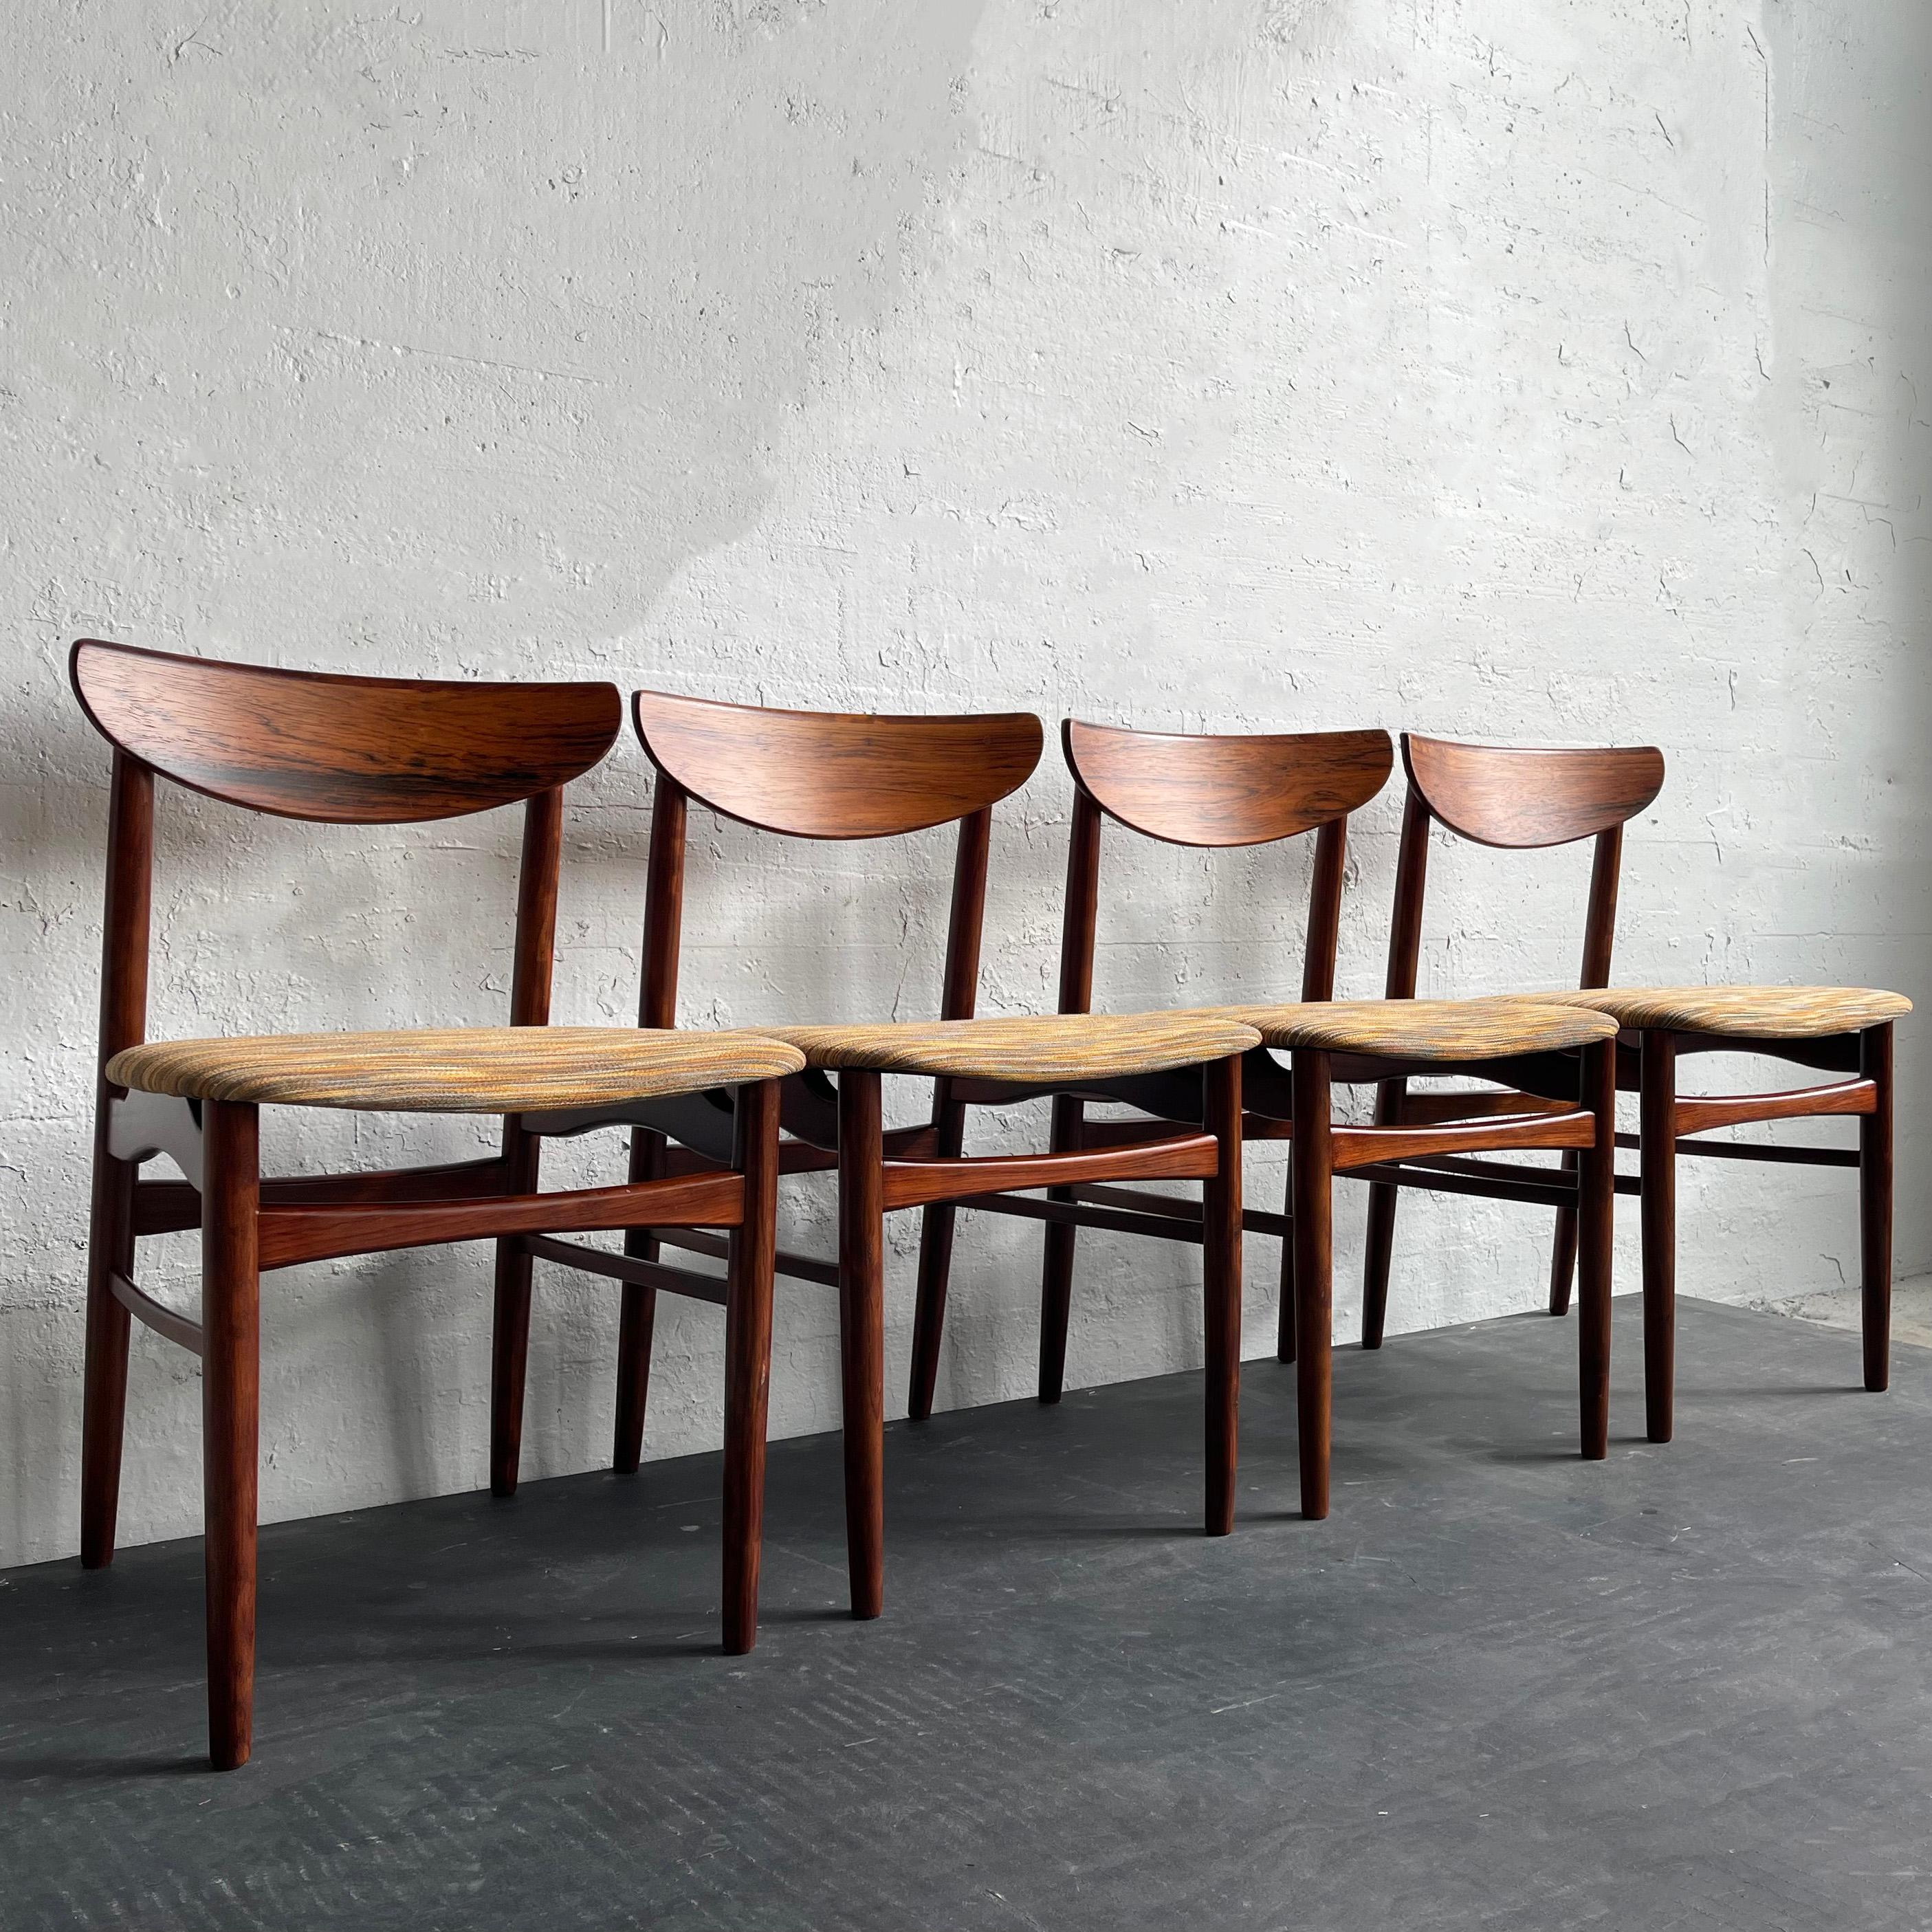 Fabric Danish Modern Rosewood Dining Chairs By Kurt Østervig For K.P. Møbler For Sale